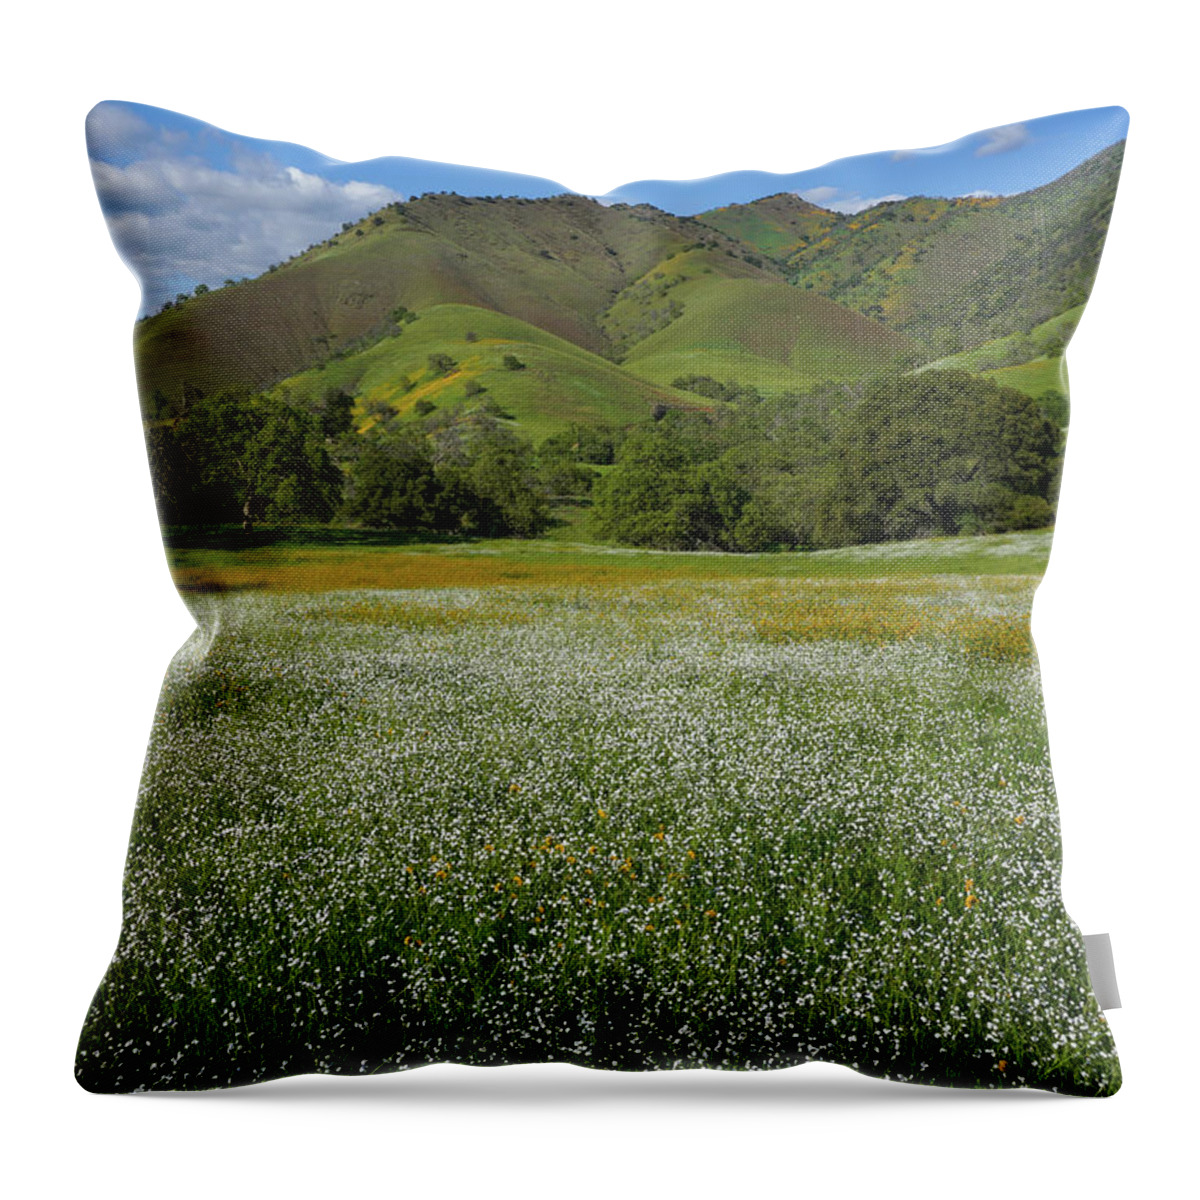 Wildflowers Throw Pillow featuring the photograph Rusty Popcorn And Fiddleneck Dry Creek Canyon by Brett Harvey